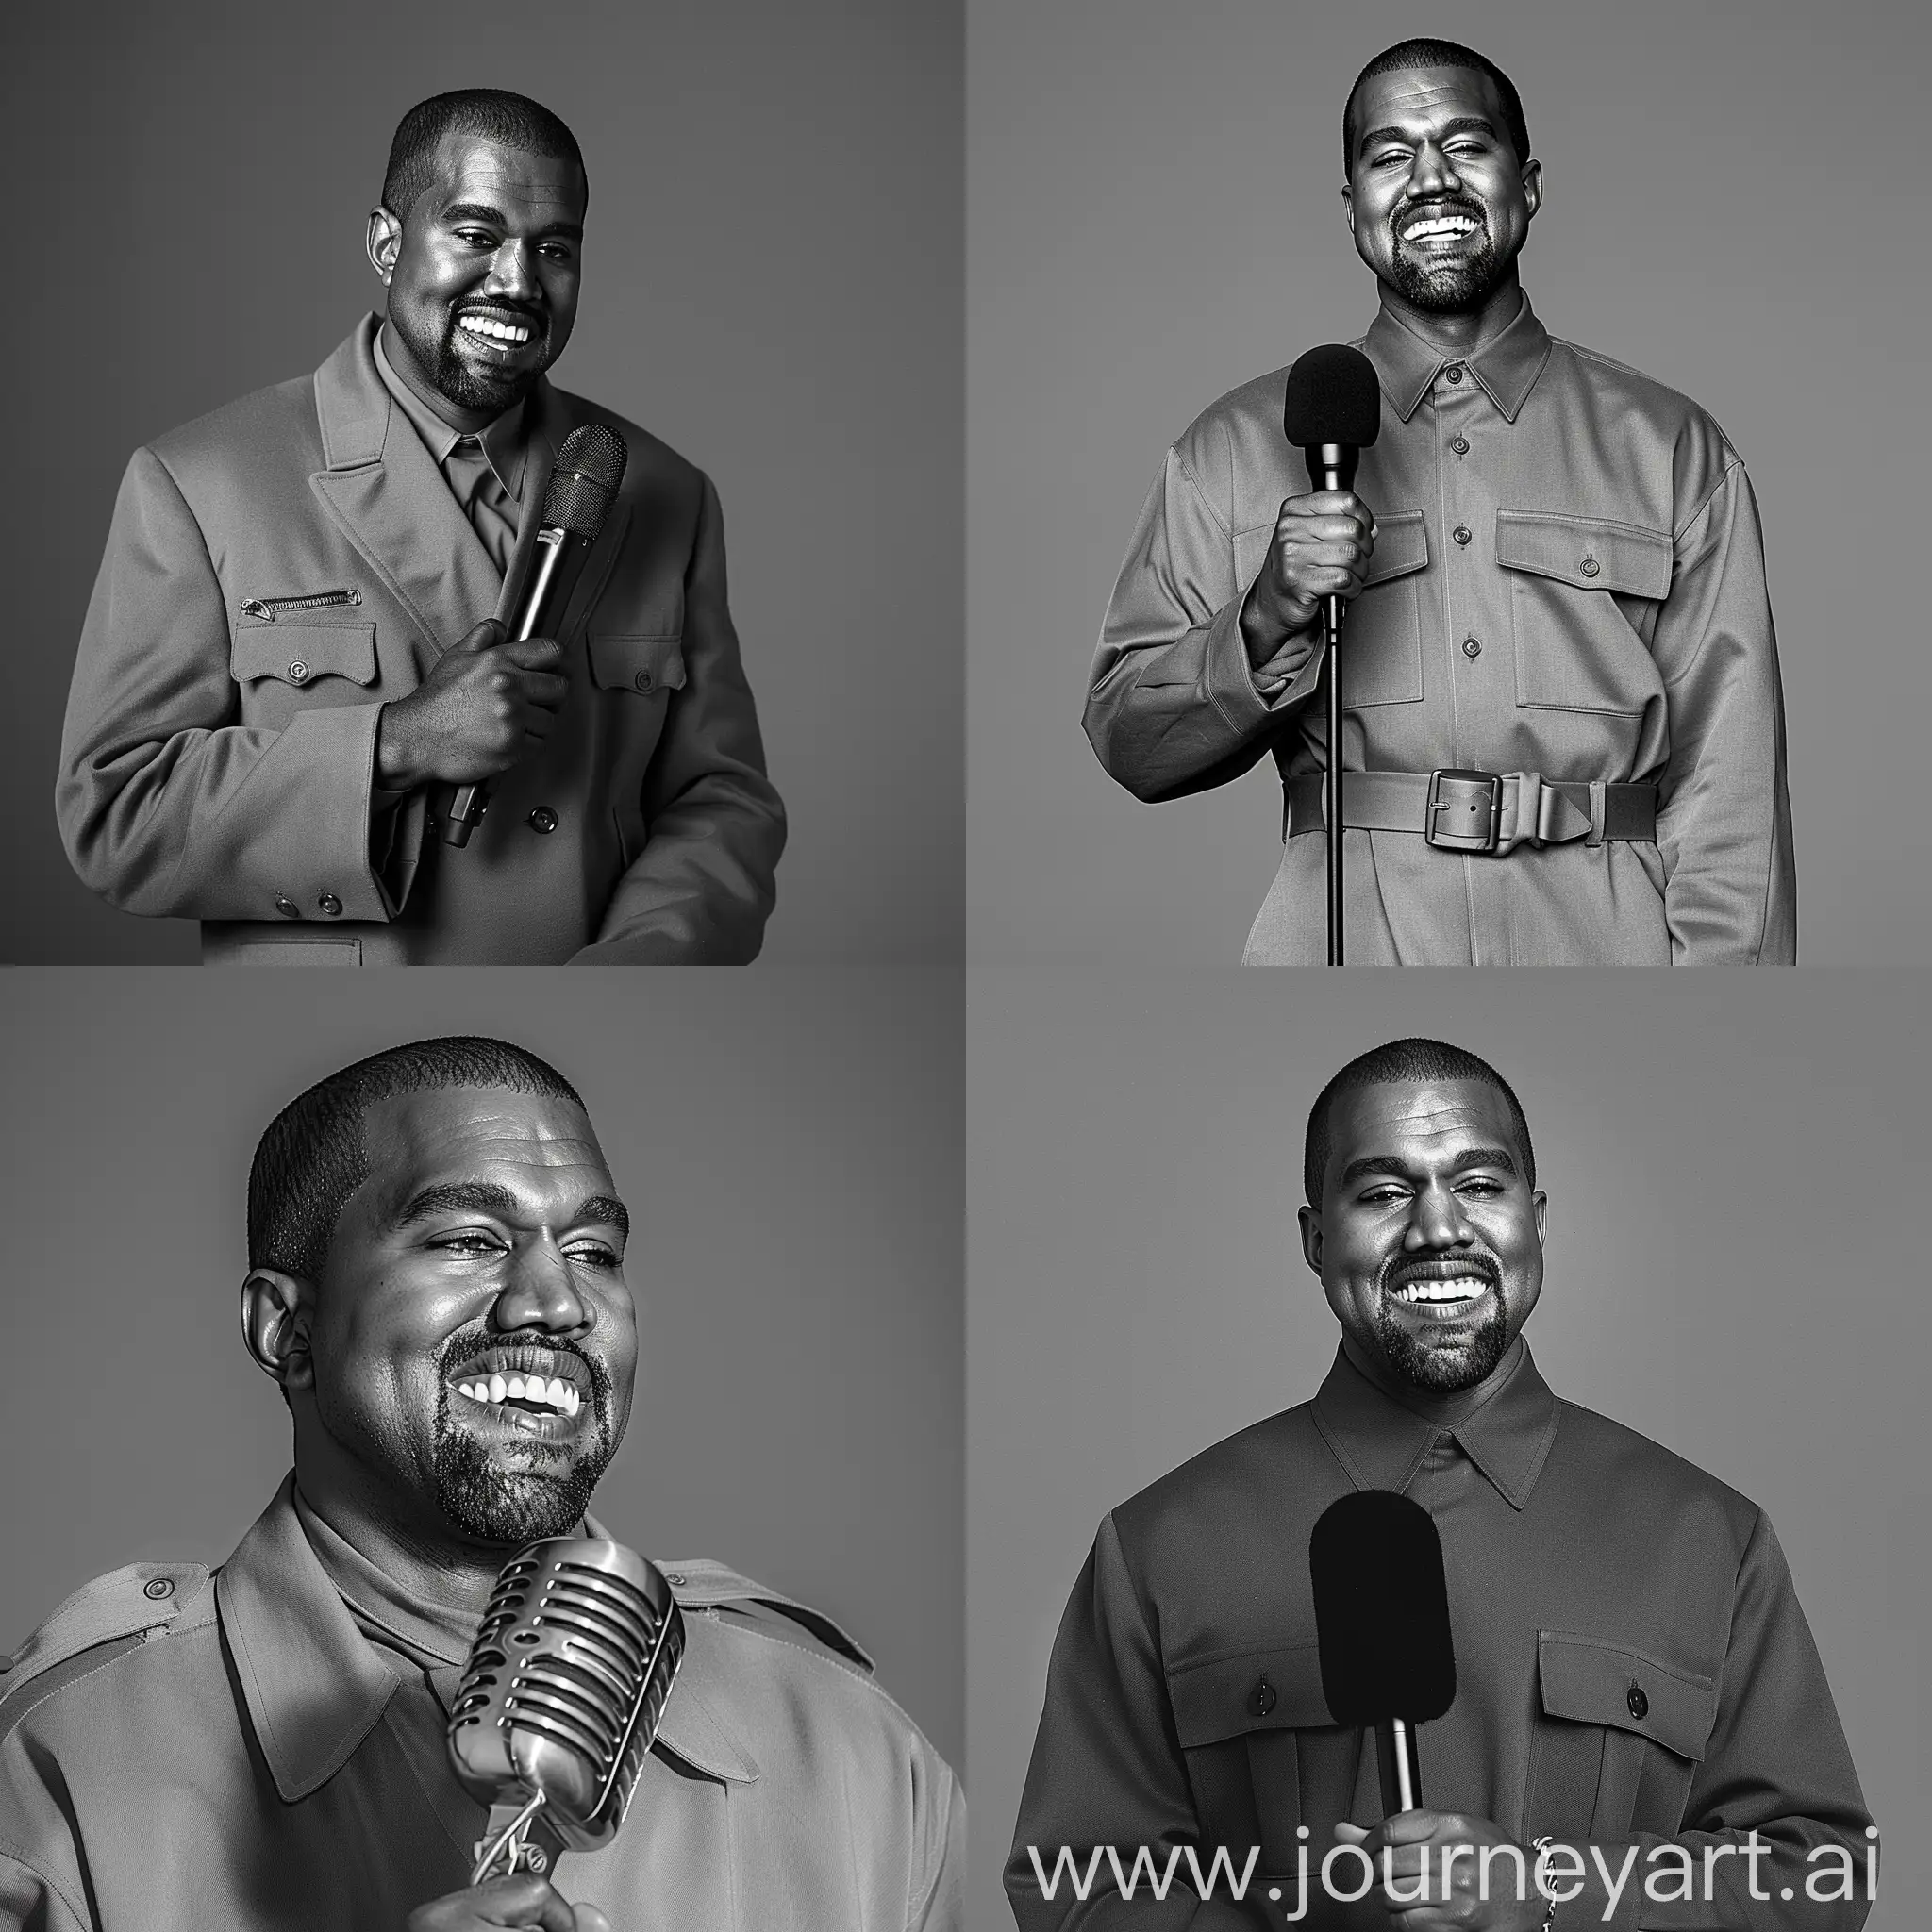 Kanye-West-Smiling-with-a-Microphone-in-Stylish-Black-and-White-Portrait